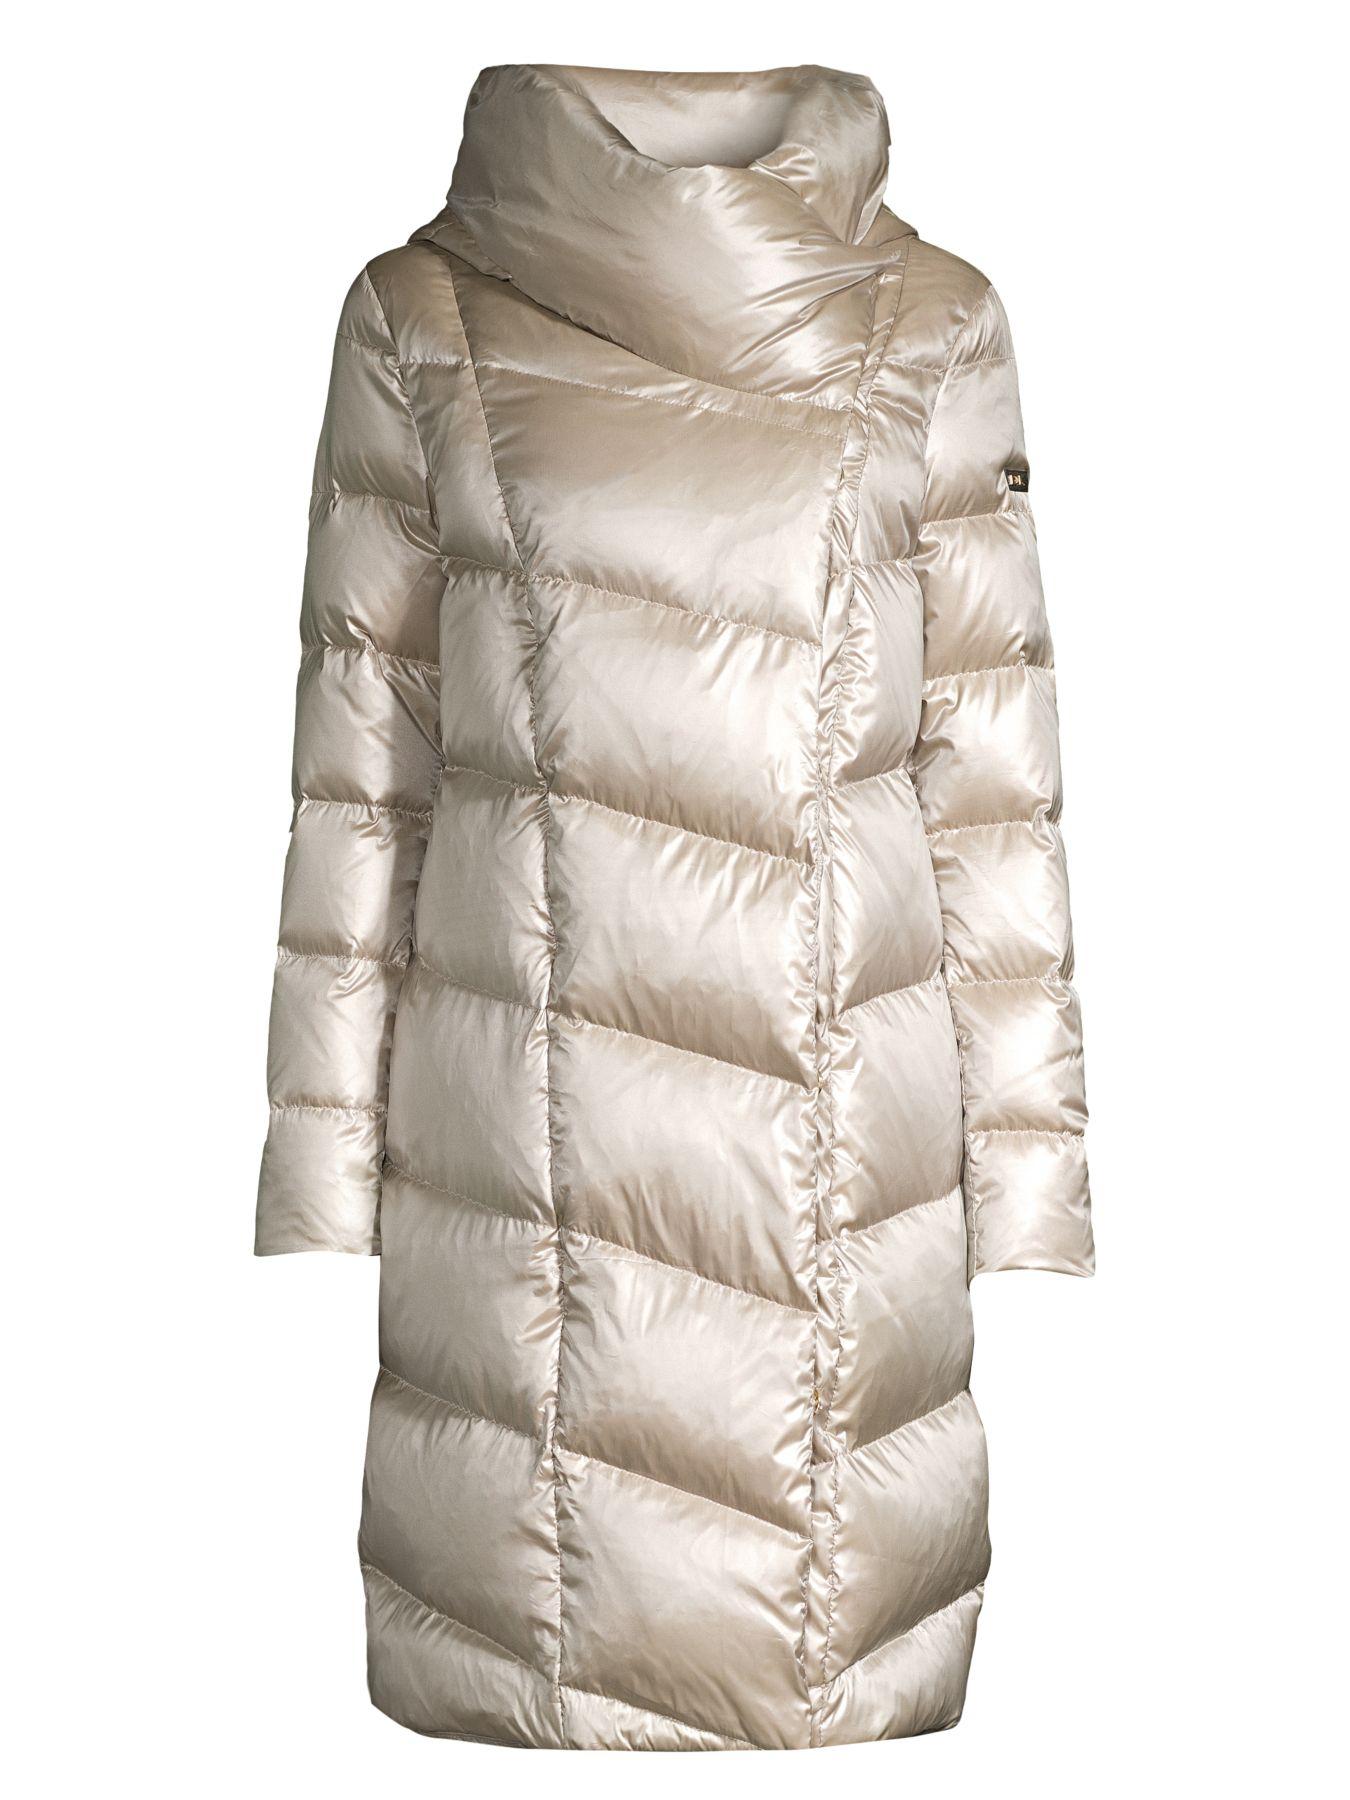 Donna Karan Synthetic Funnel-neck Down Coat in Natural - Lyst